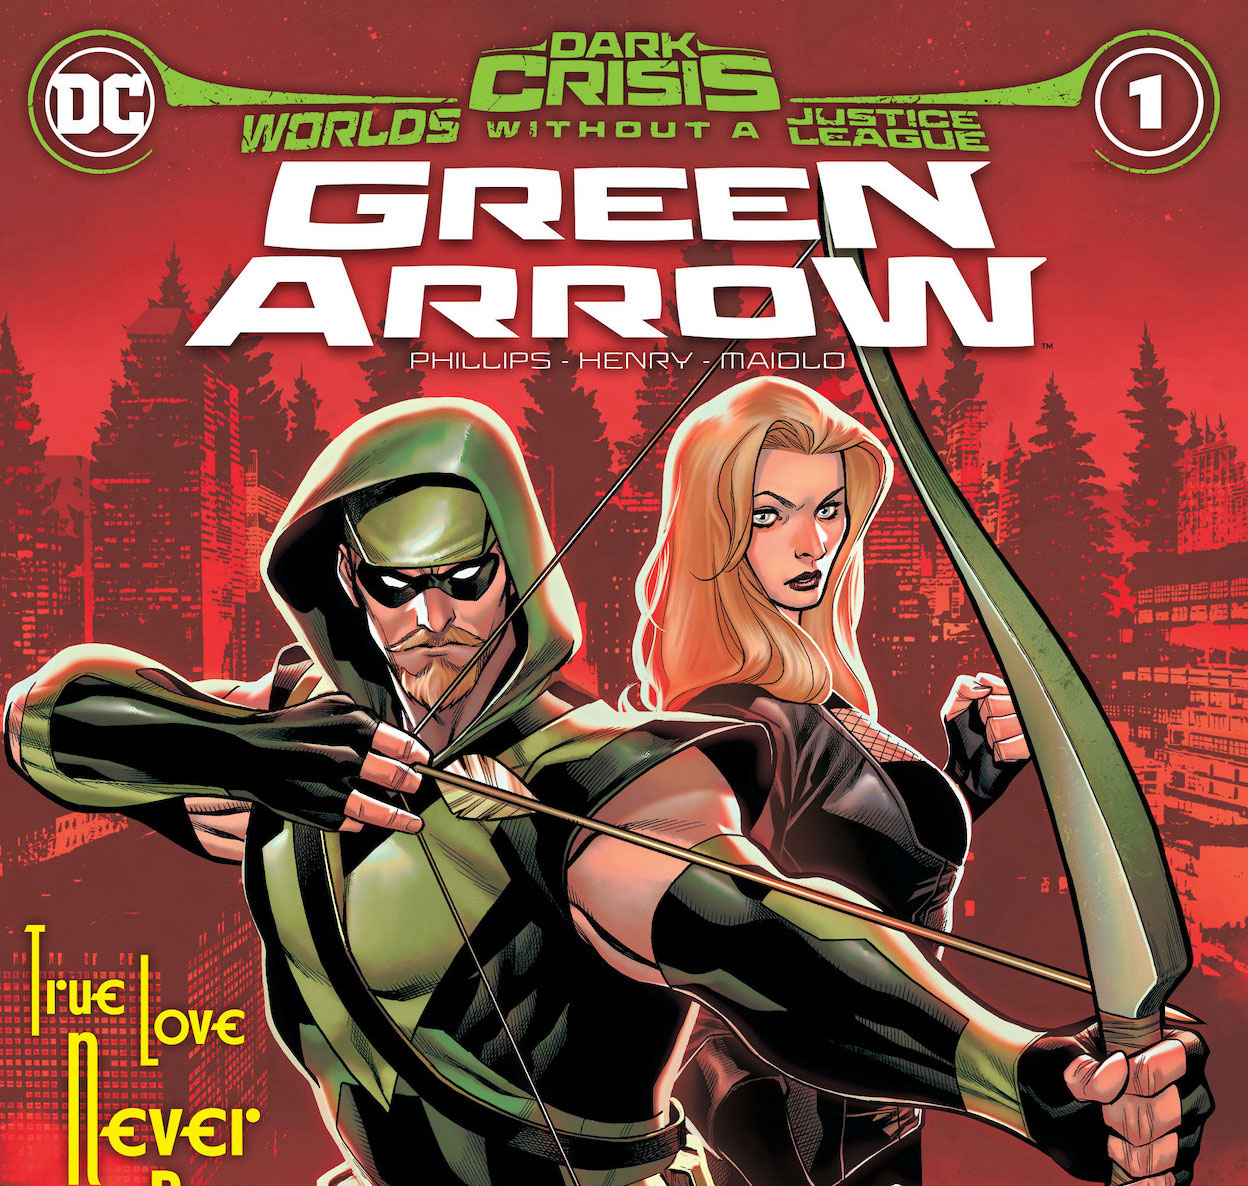 DC Preview: Dark Crisis: Worlds Without A Justice League - Green Arrow #1